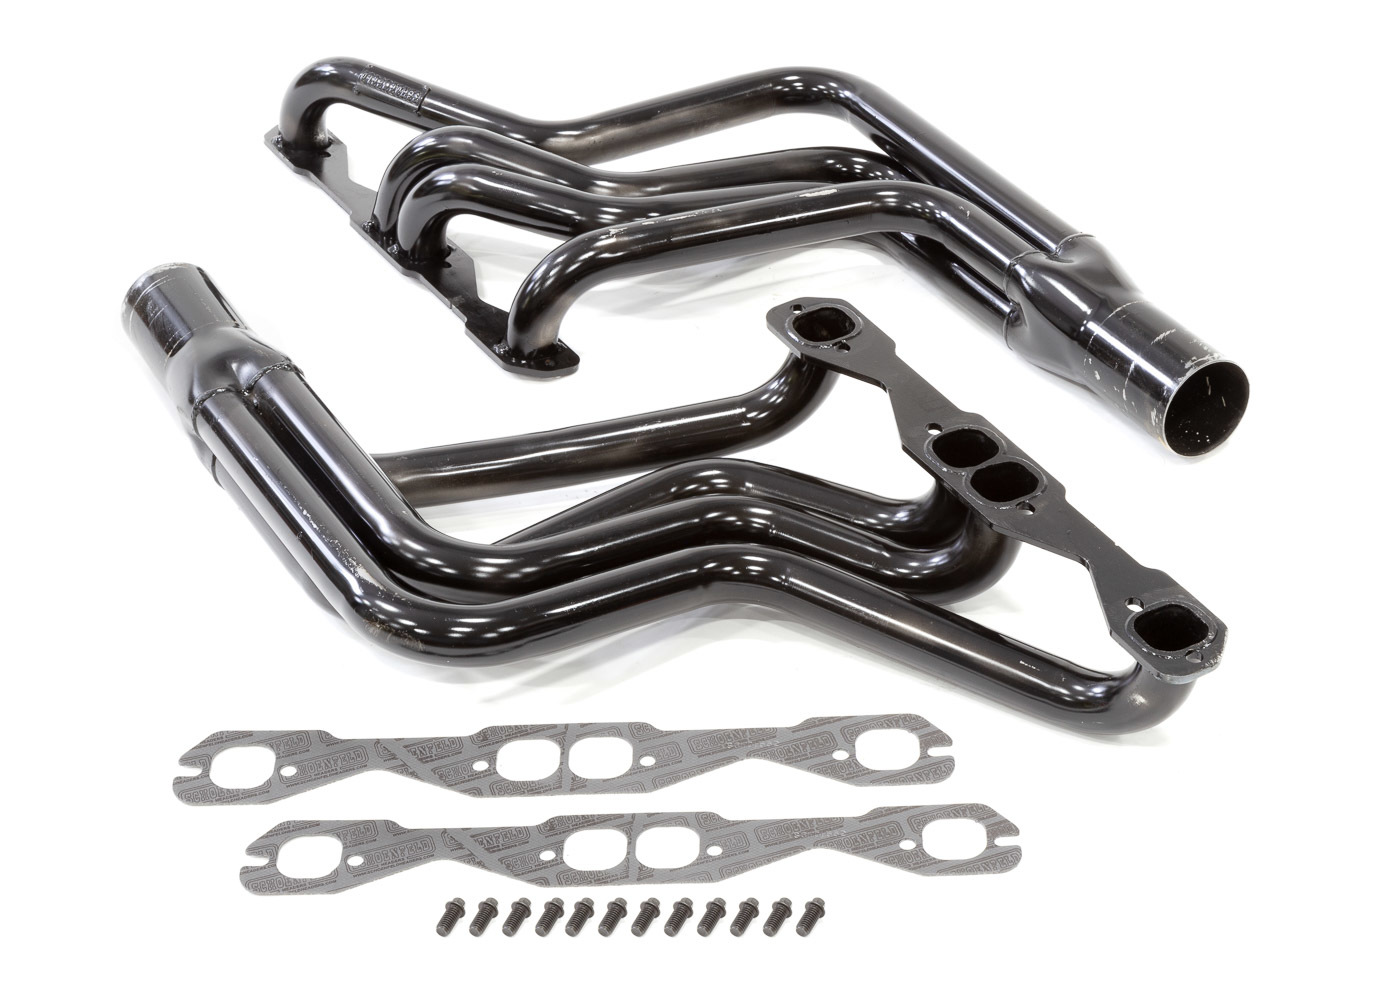 Schoenfeld Headers 165ACM2 - Headers, Street Stock, 1-5/8 in Primary, 3 in Collector, Steel, Black Paint, 602 Crate, Small Block Chevy, GM A-Body / F-Body / X-Body, Kit